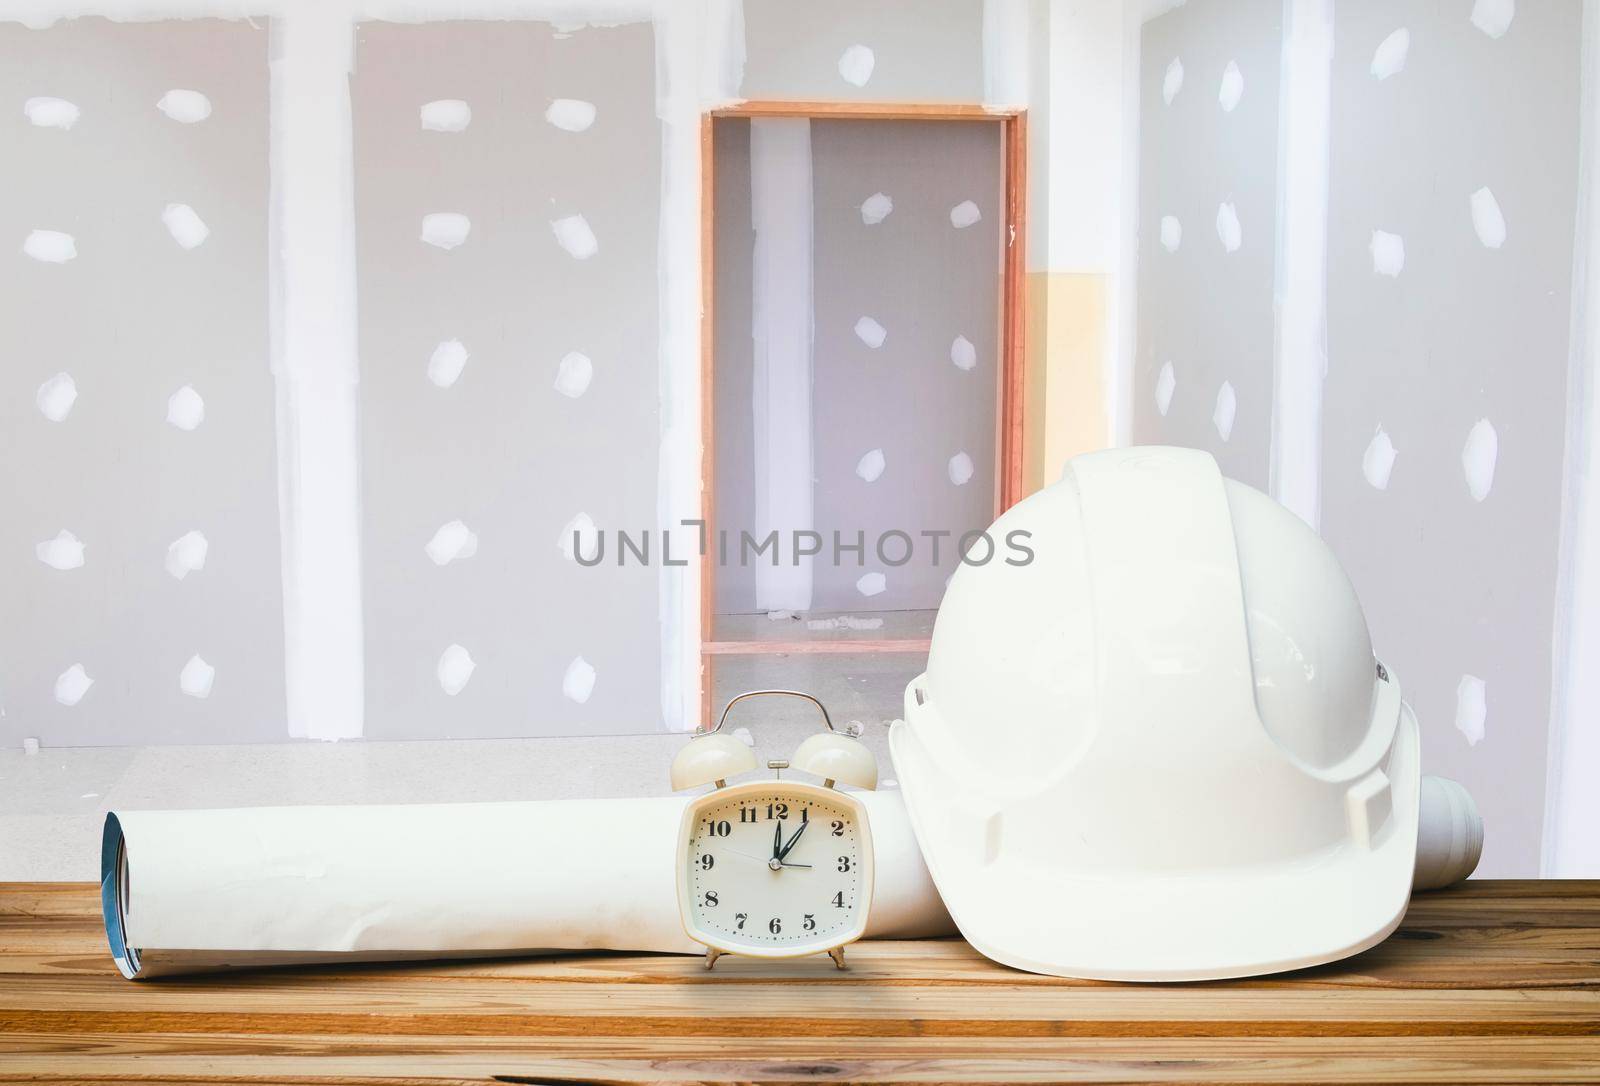 white safety helmet plastic, paper roll plan blueprint alarm clock time a rest at noon on wood floor table and gypsum board wall remodel interior with copy space add text by pramot